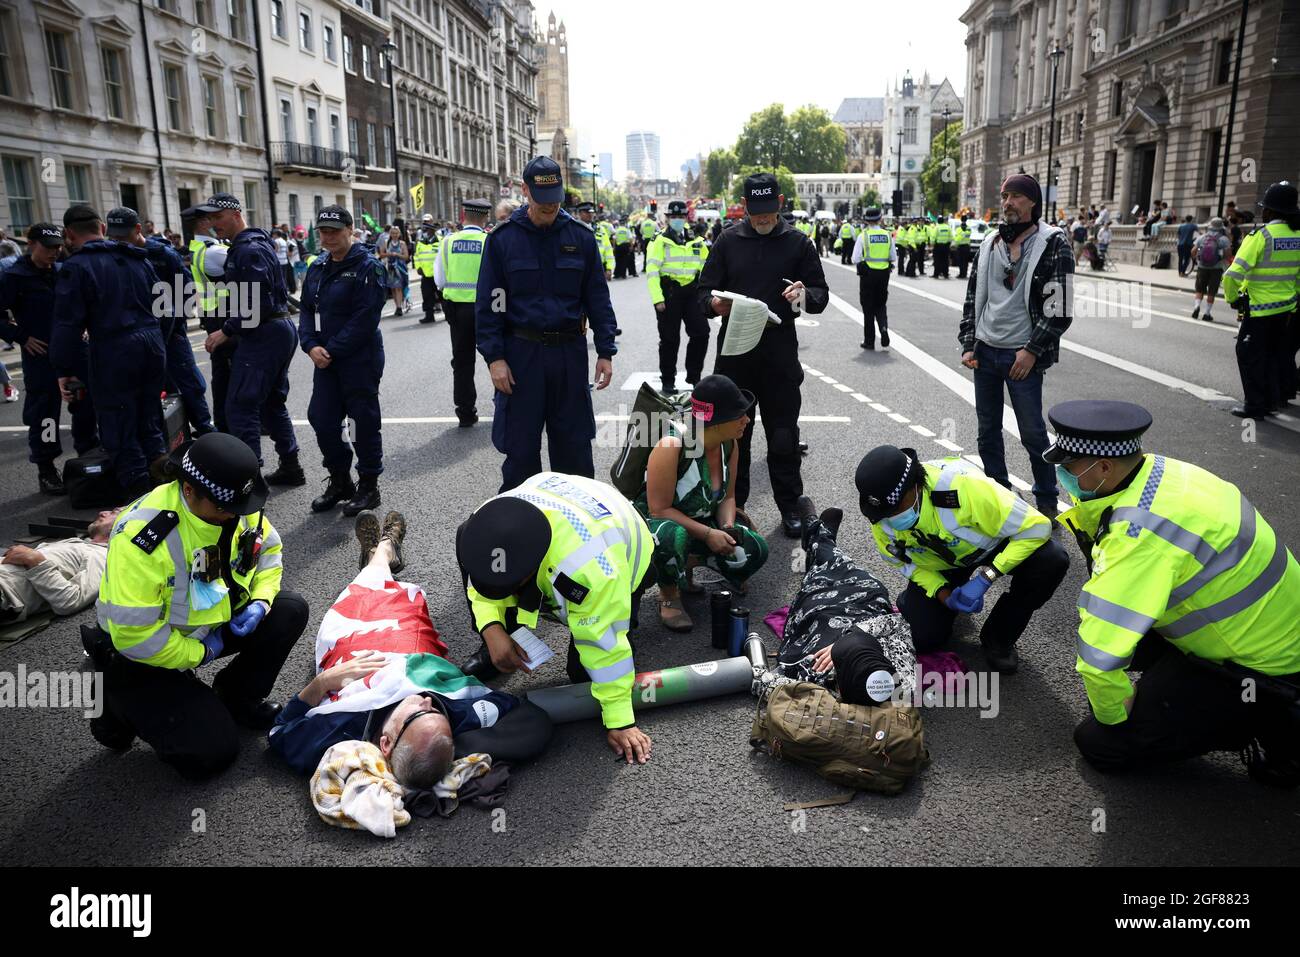 Police officers approach protesters chained to each other during an Extinction Rebellion climate activists' protest, outside Her Majesty's Revenue and Customs (HMRC) on Whitehall in London, Britain August 24, 2021. REUTERS/Henry Nicholls Stock Photo